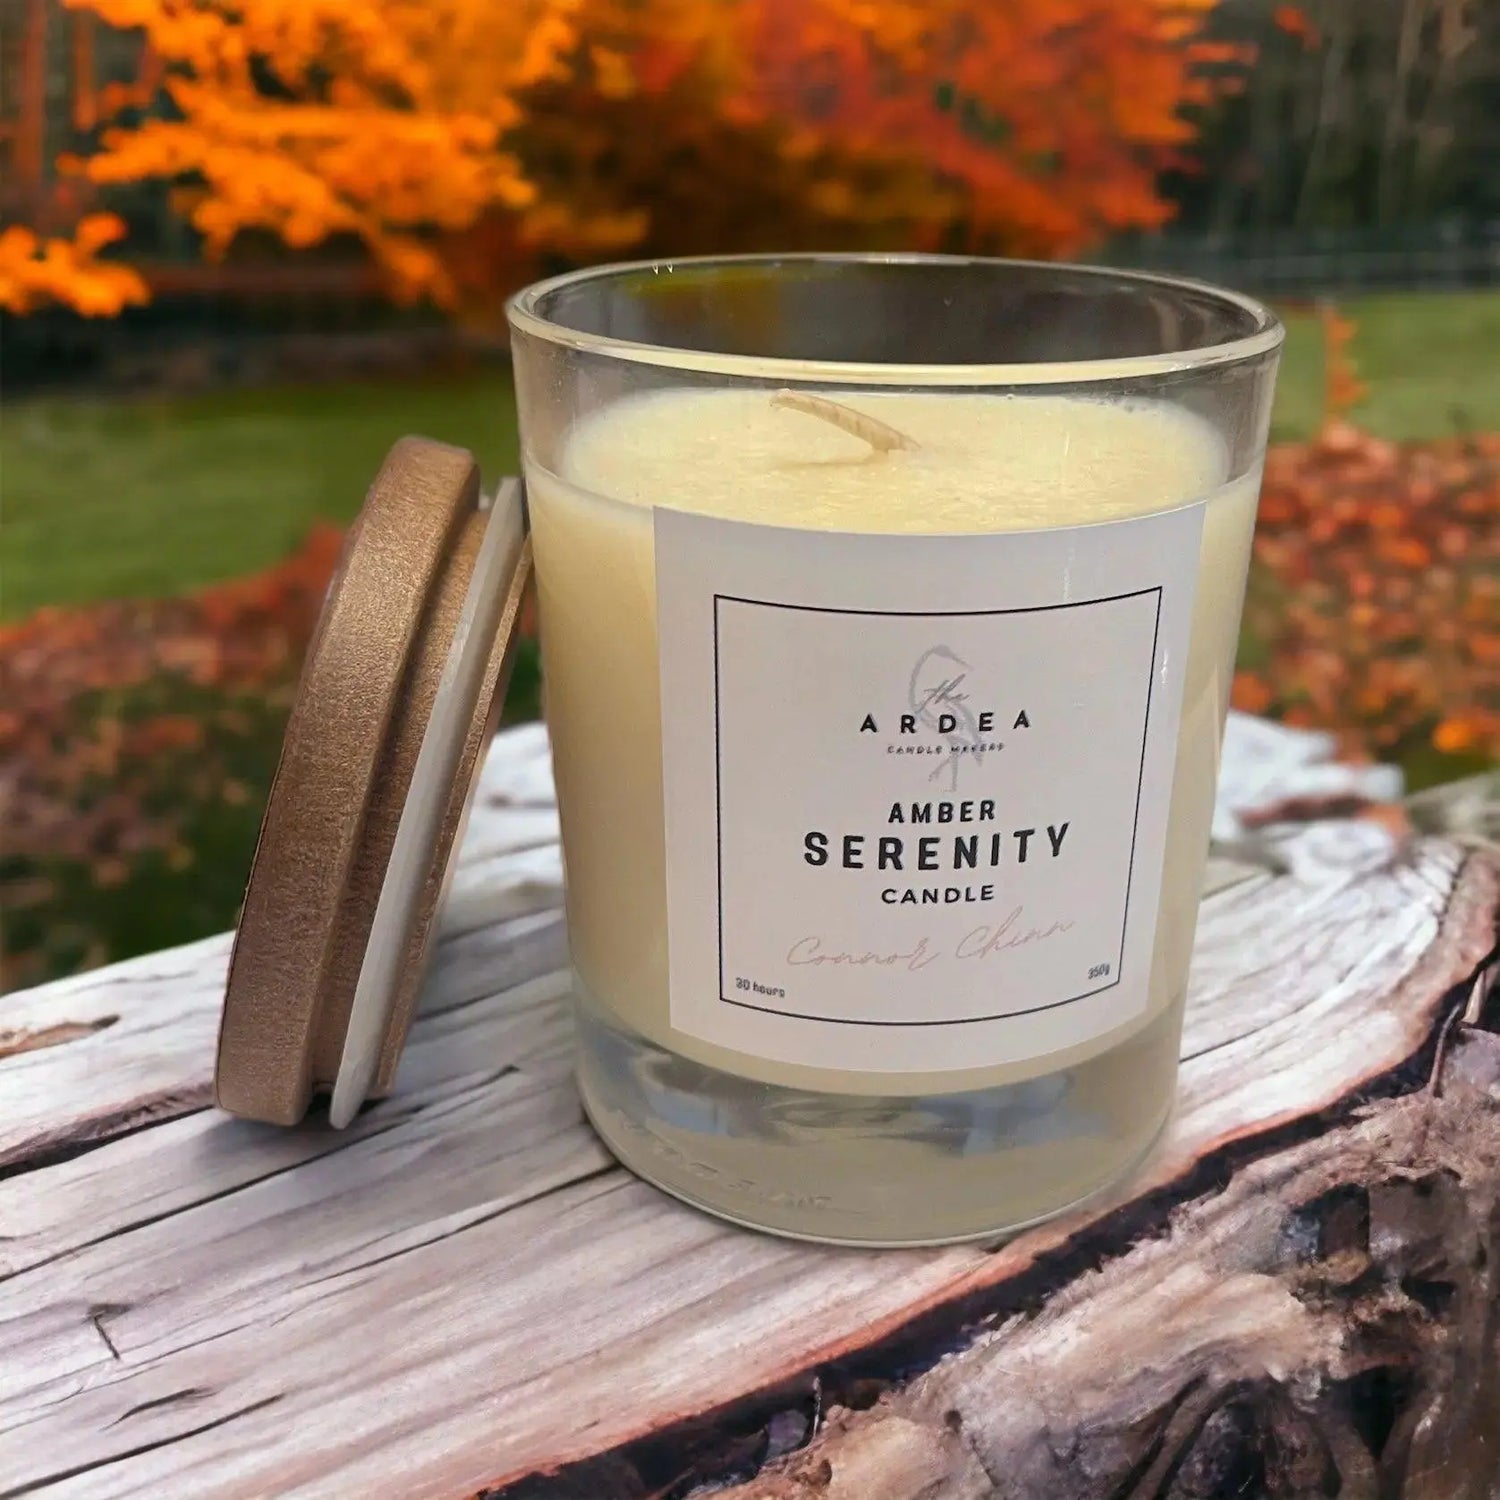 Amber Serenity Candle - 600g - The Ardea Candle Makers